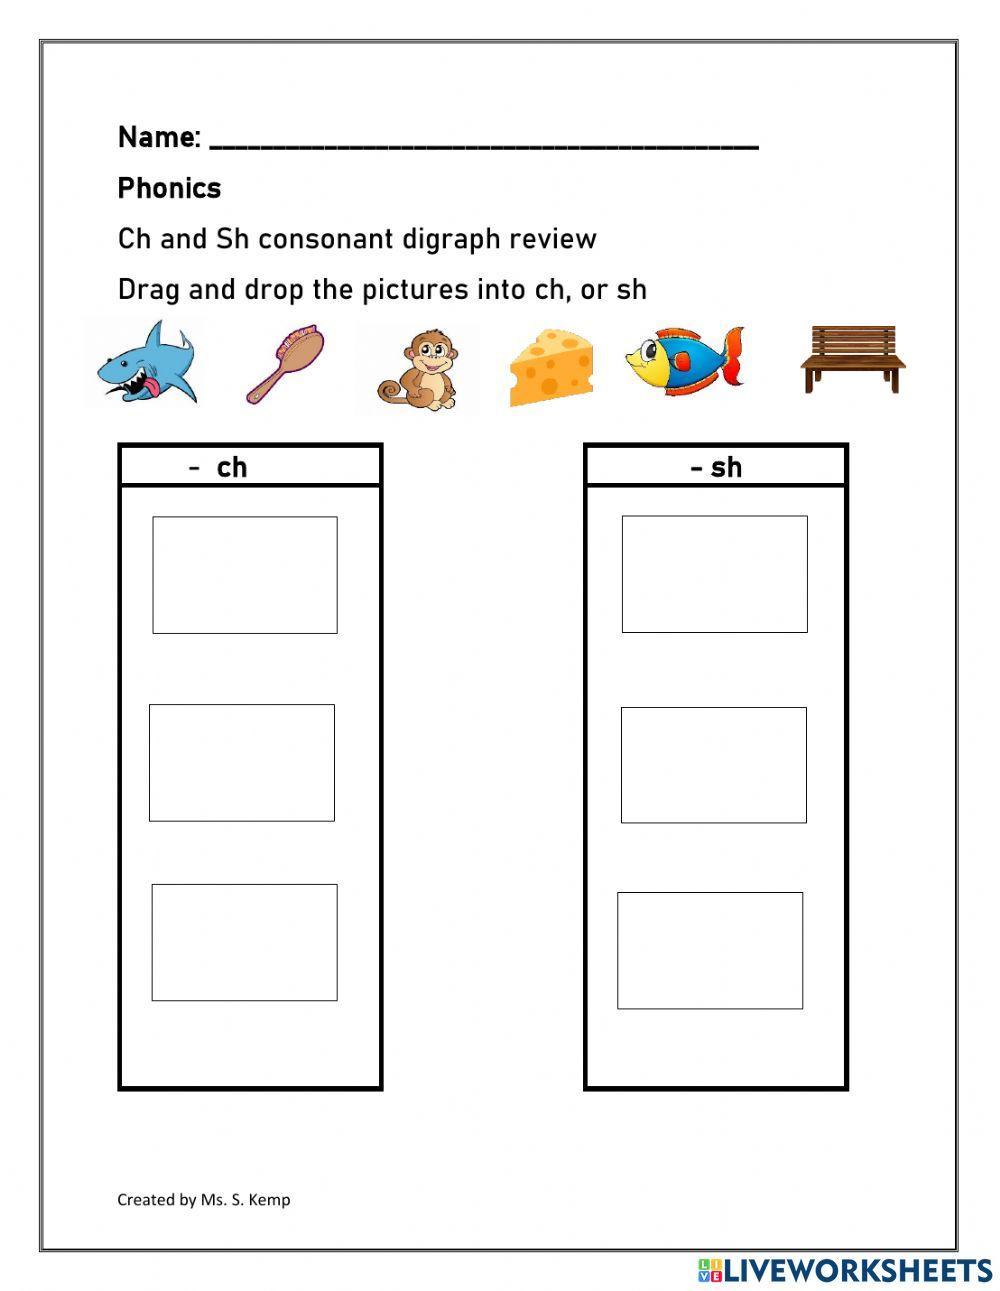 Ch and Sh digraph review